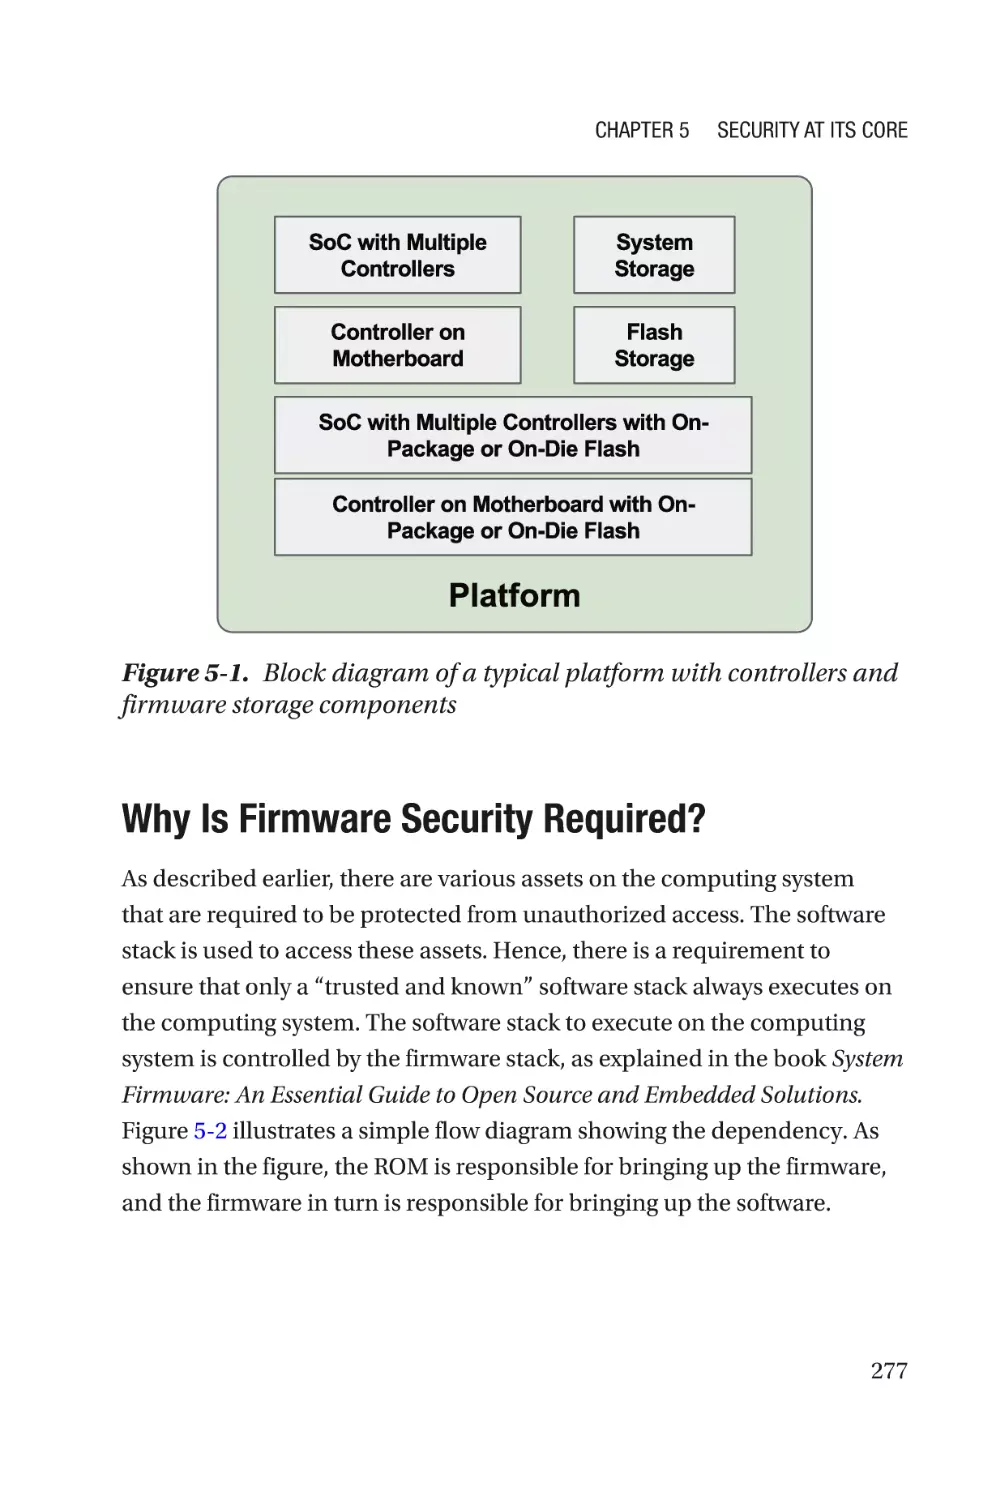 Why Is Firmware Security Required?